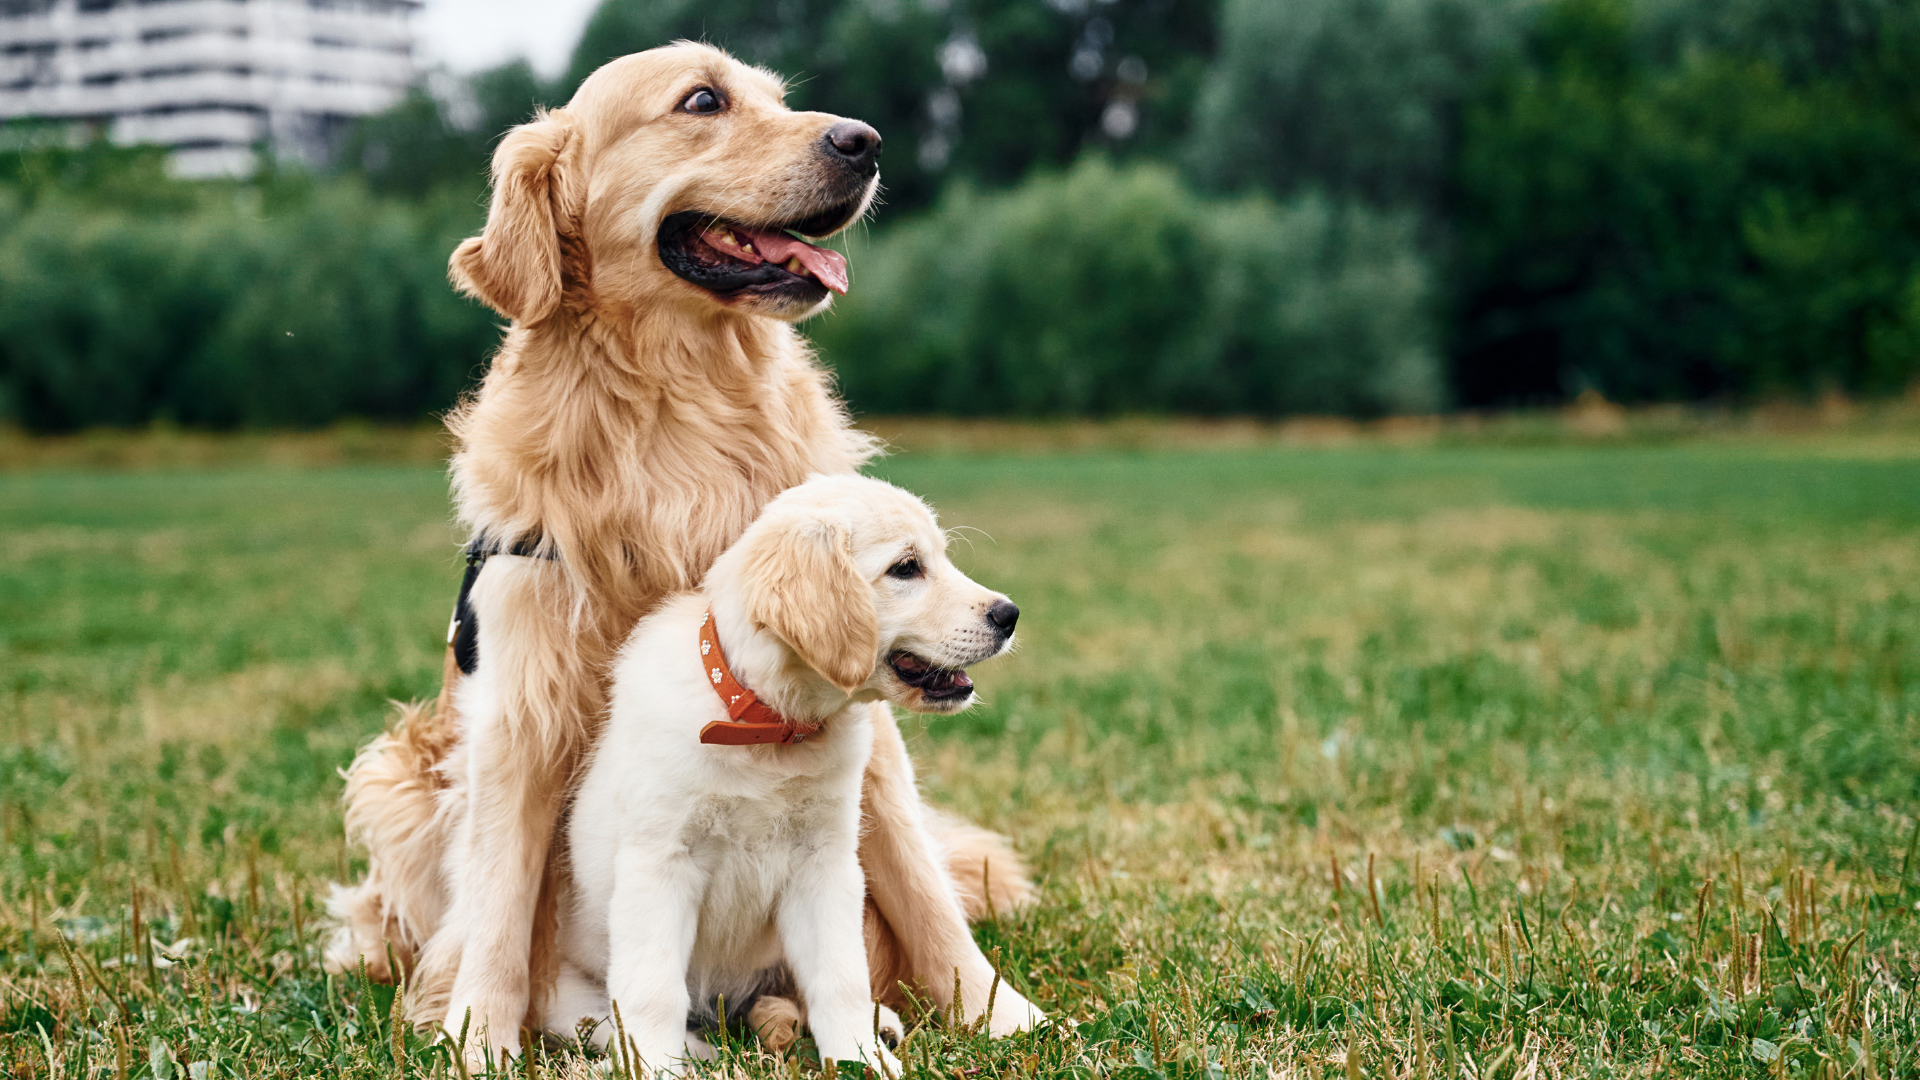 How to Introduce a Puppy to an Older Dog